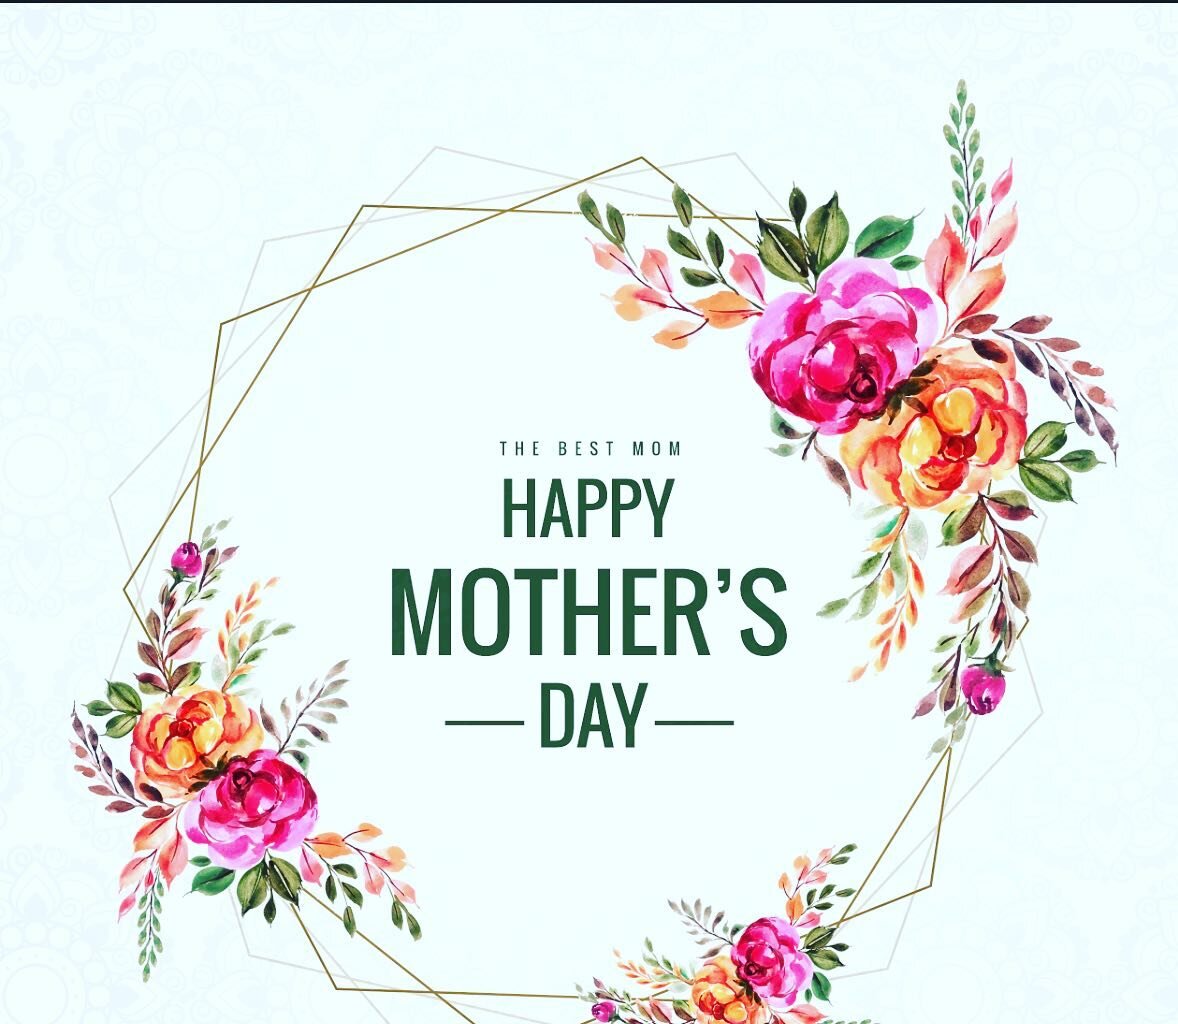 Happy Mother's Day to all of our wonderful mothers!